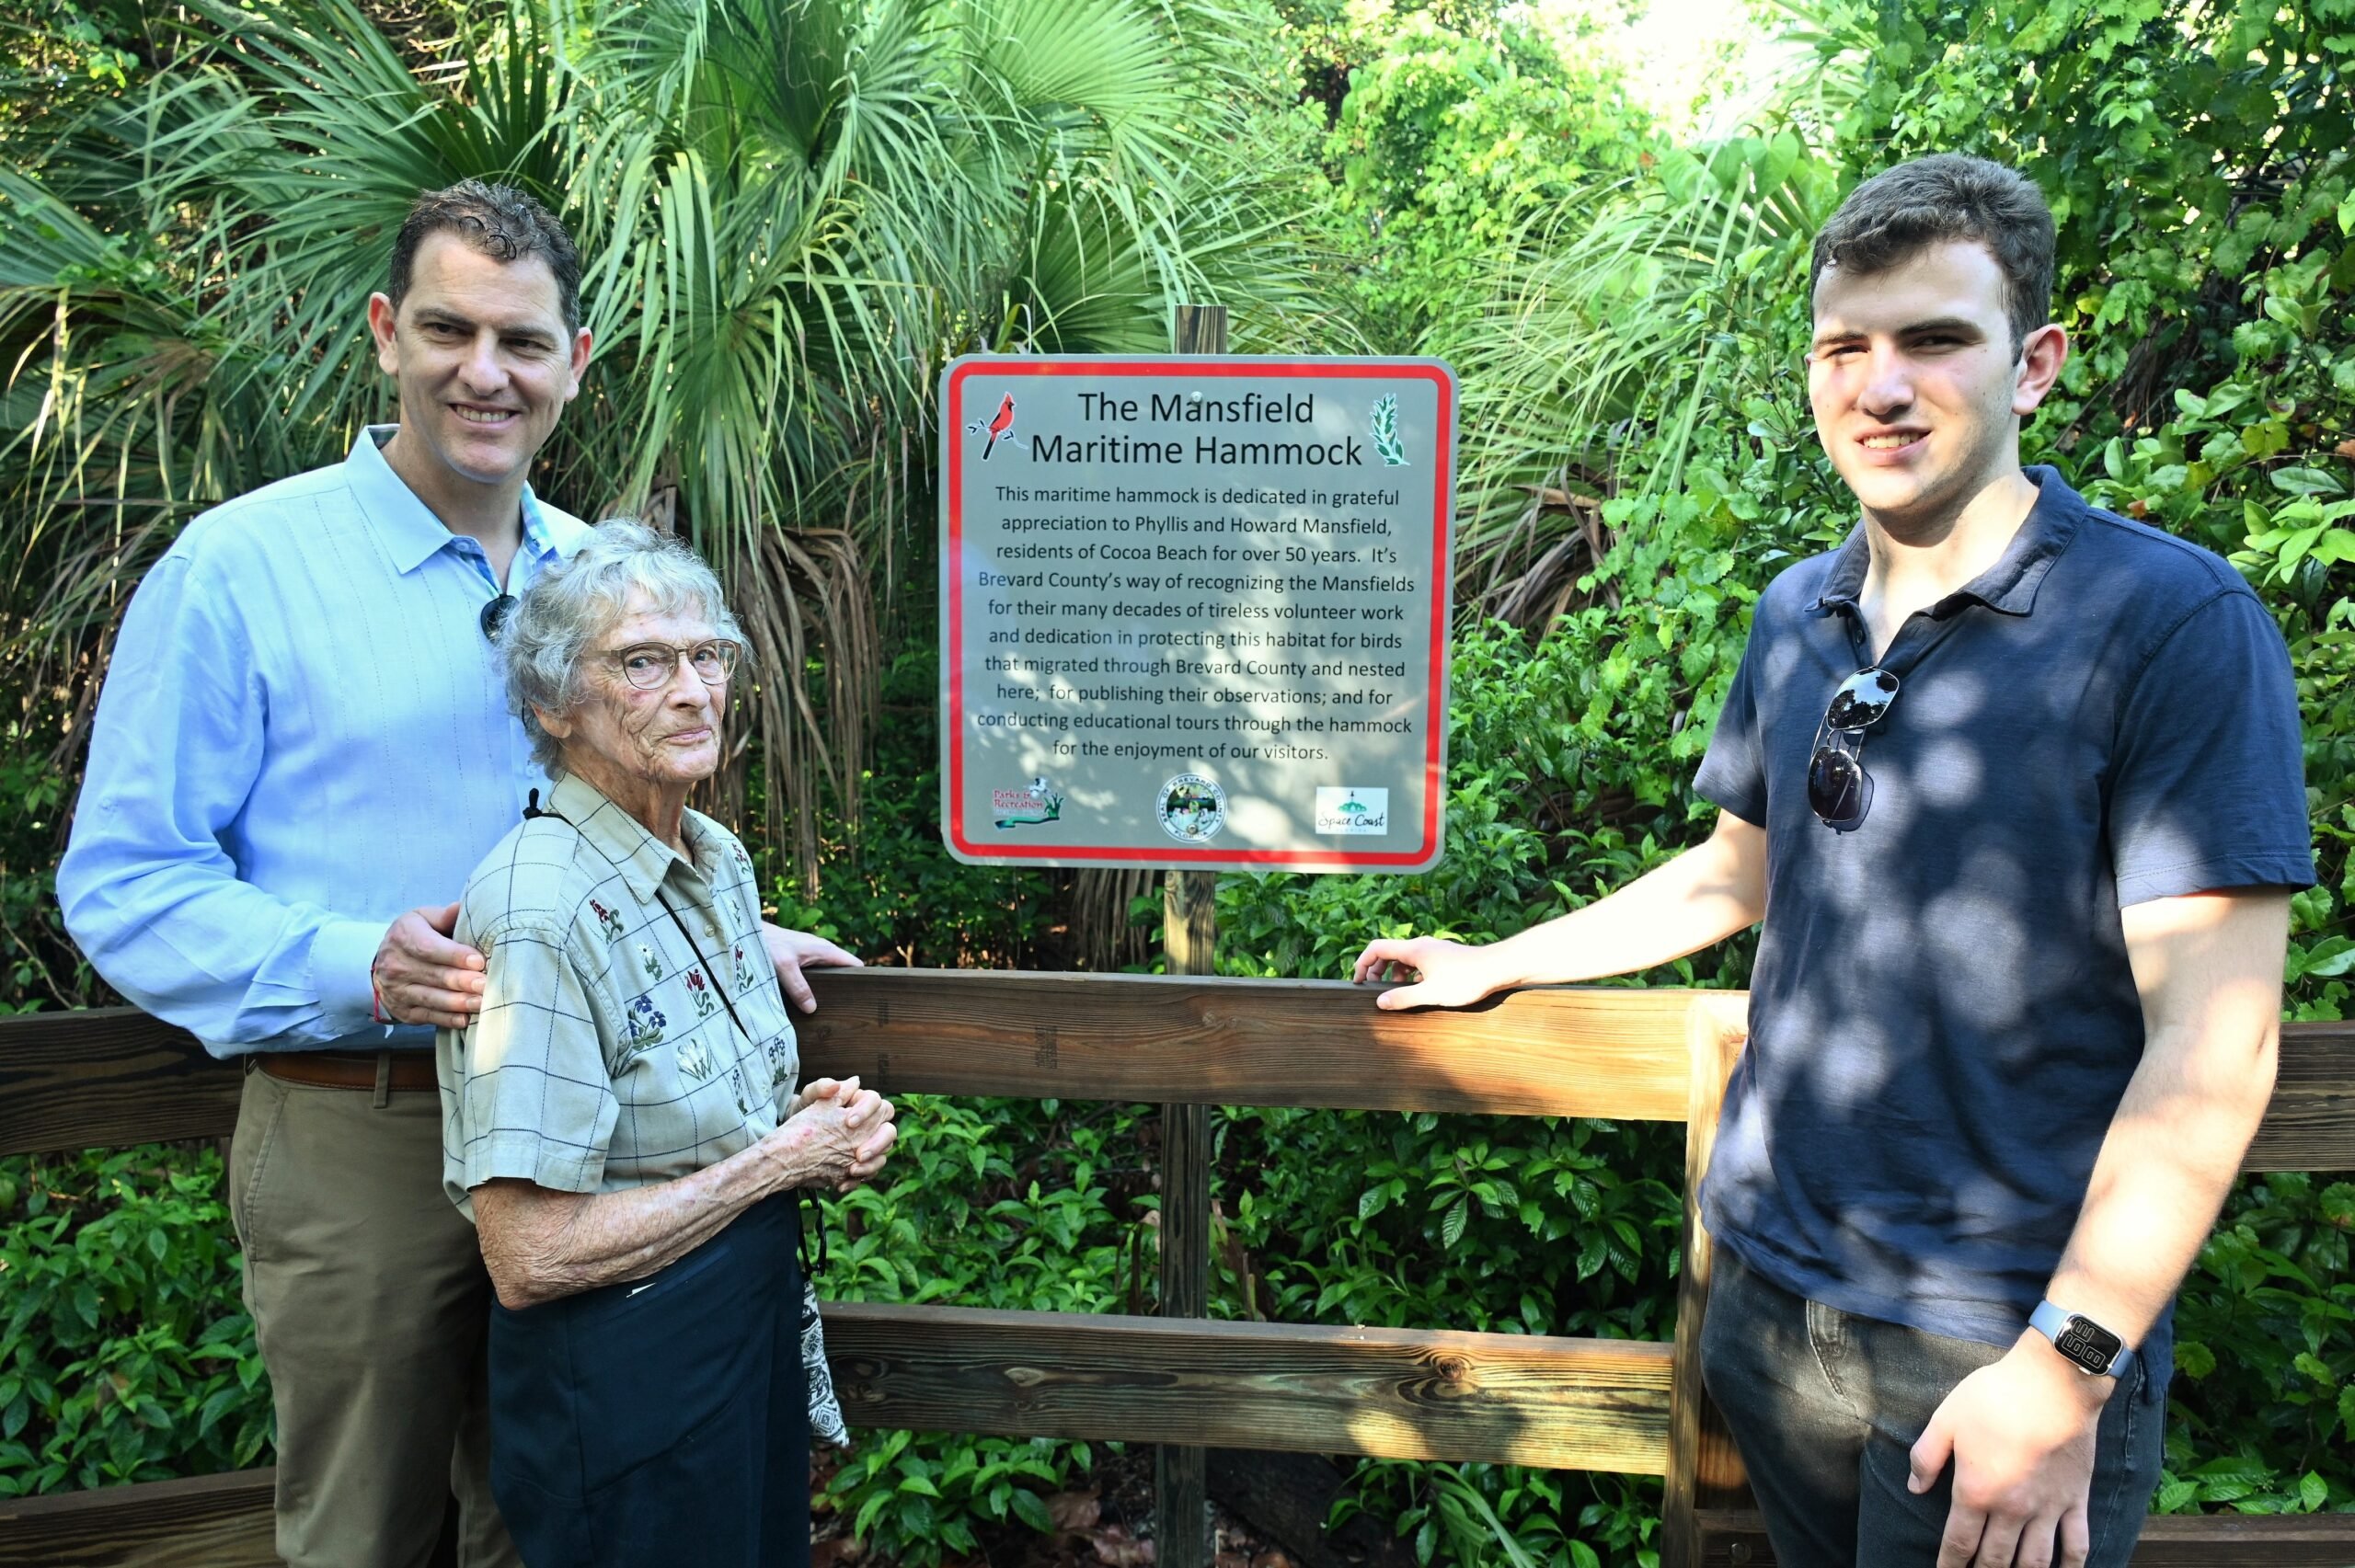 New Mansfield Maritime Hammock sign with Phyllis